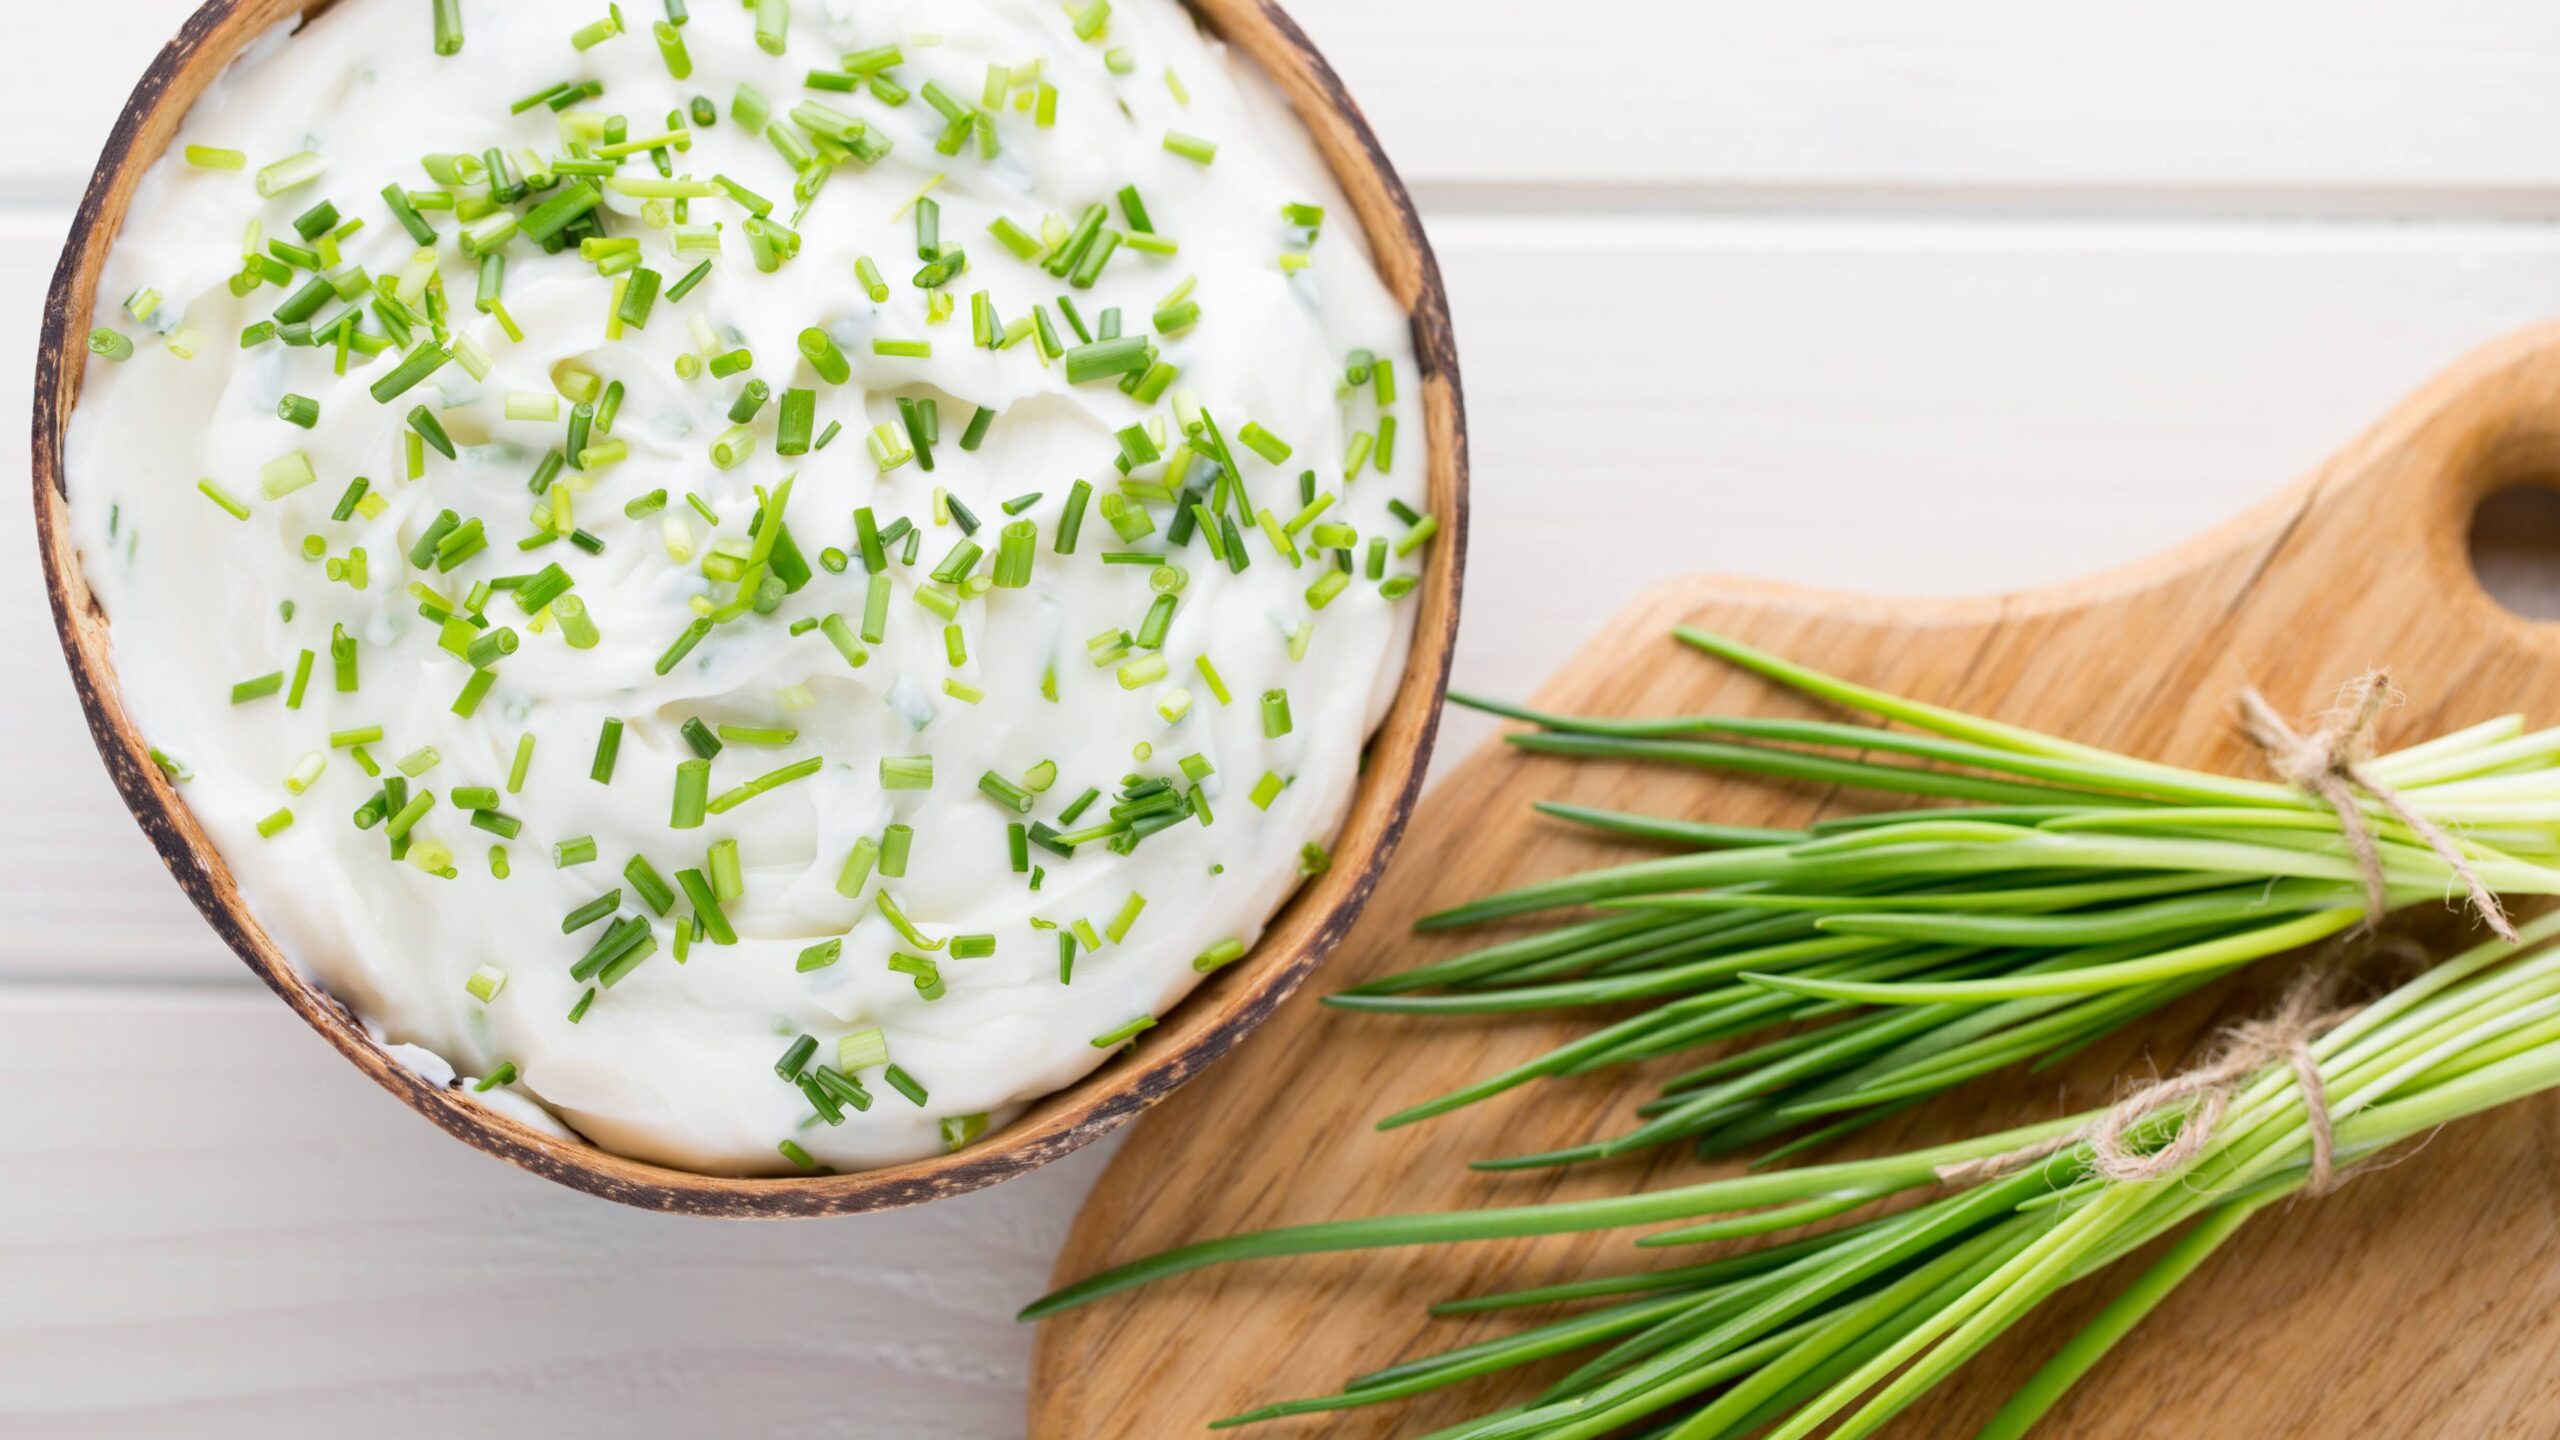 Bowl of cream cheese with green onions, dip sauce on wooden table.